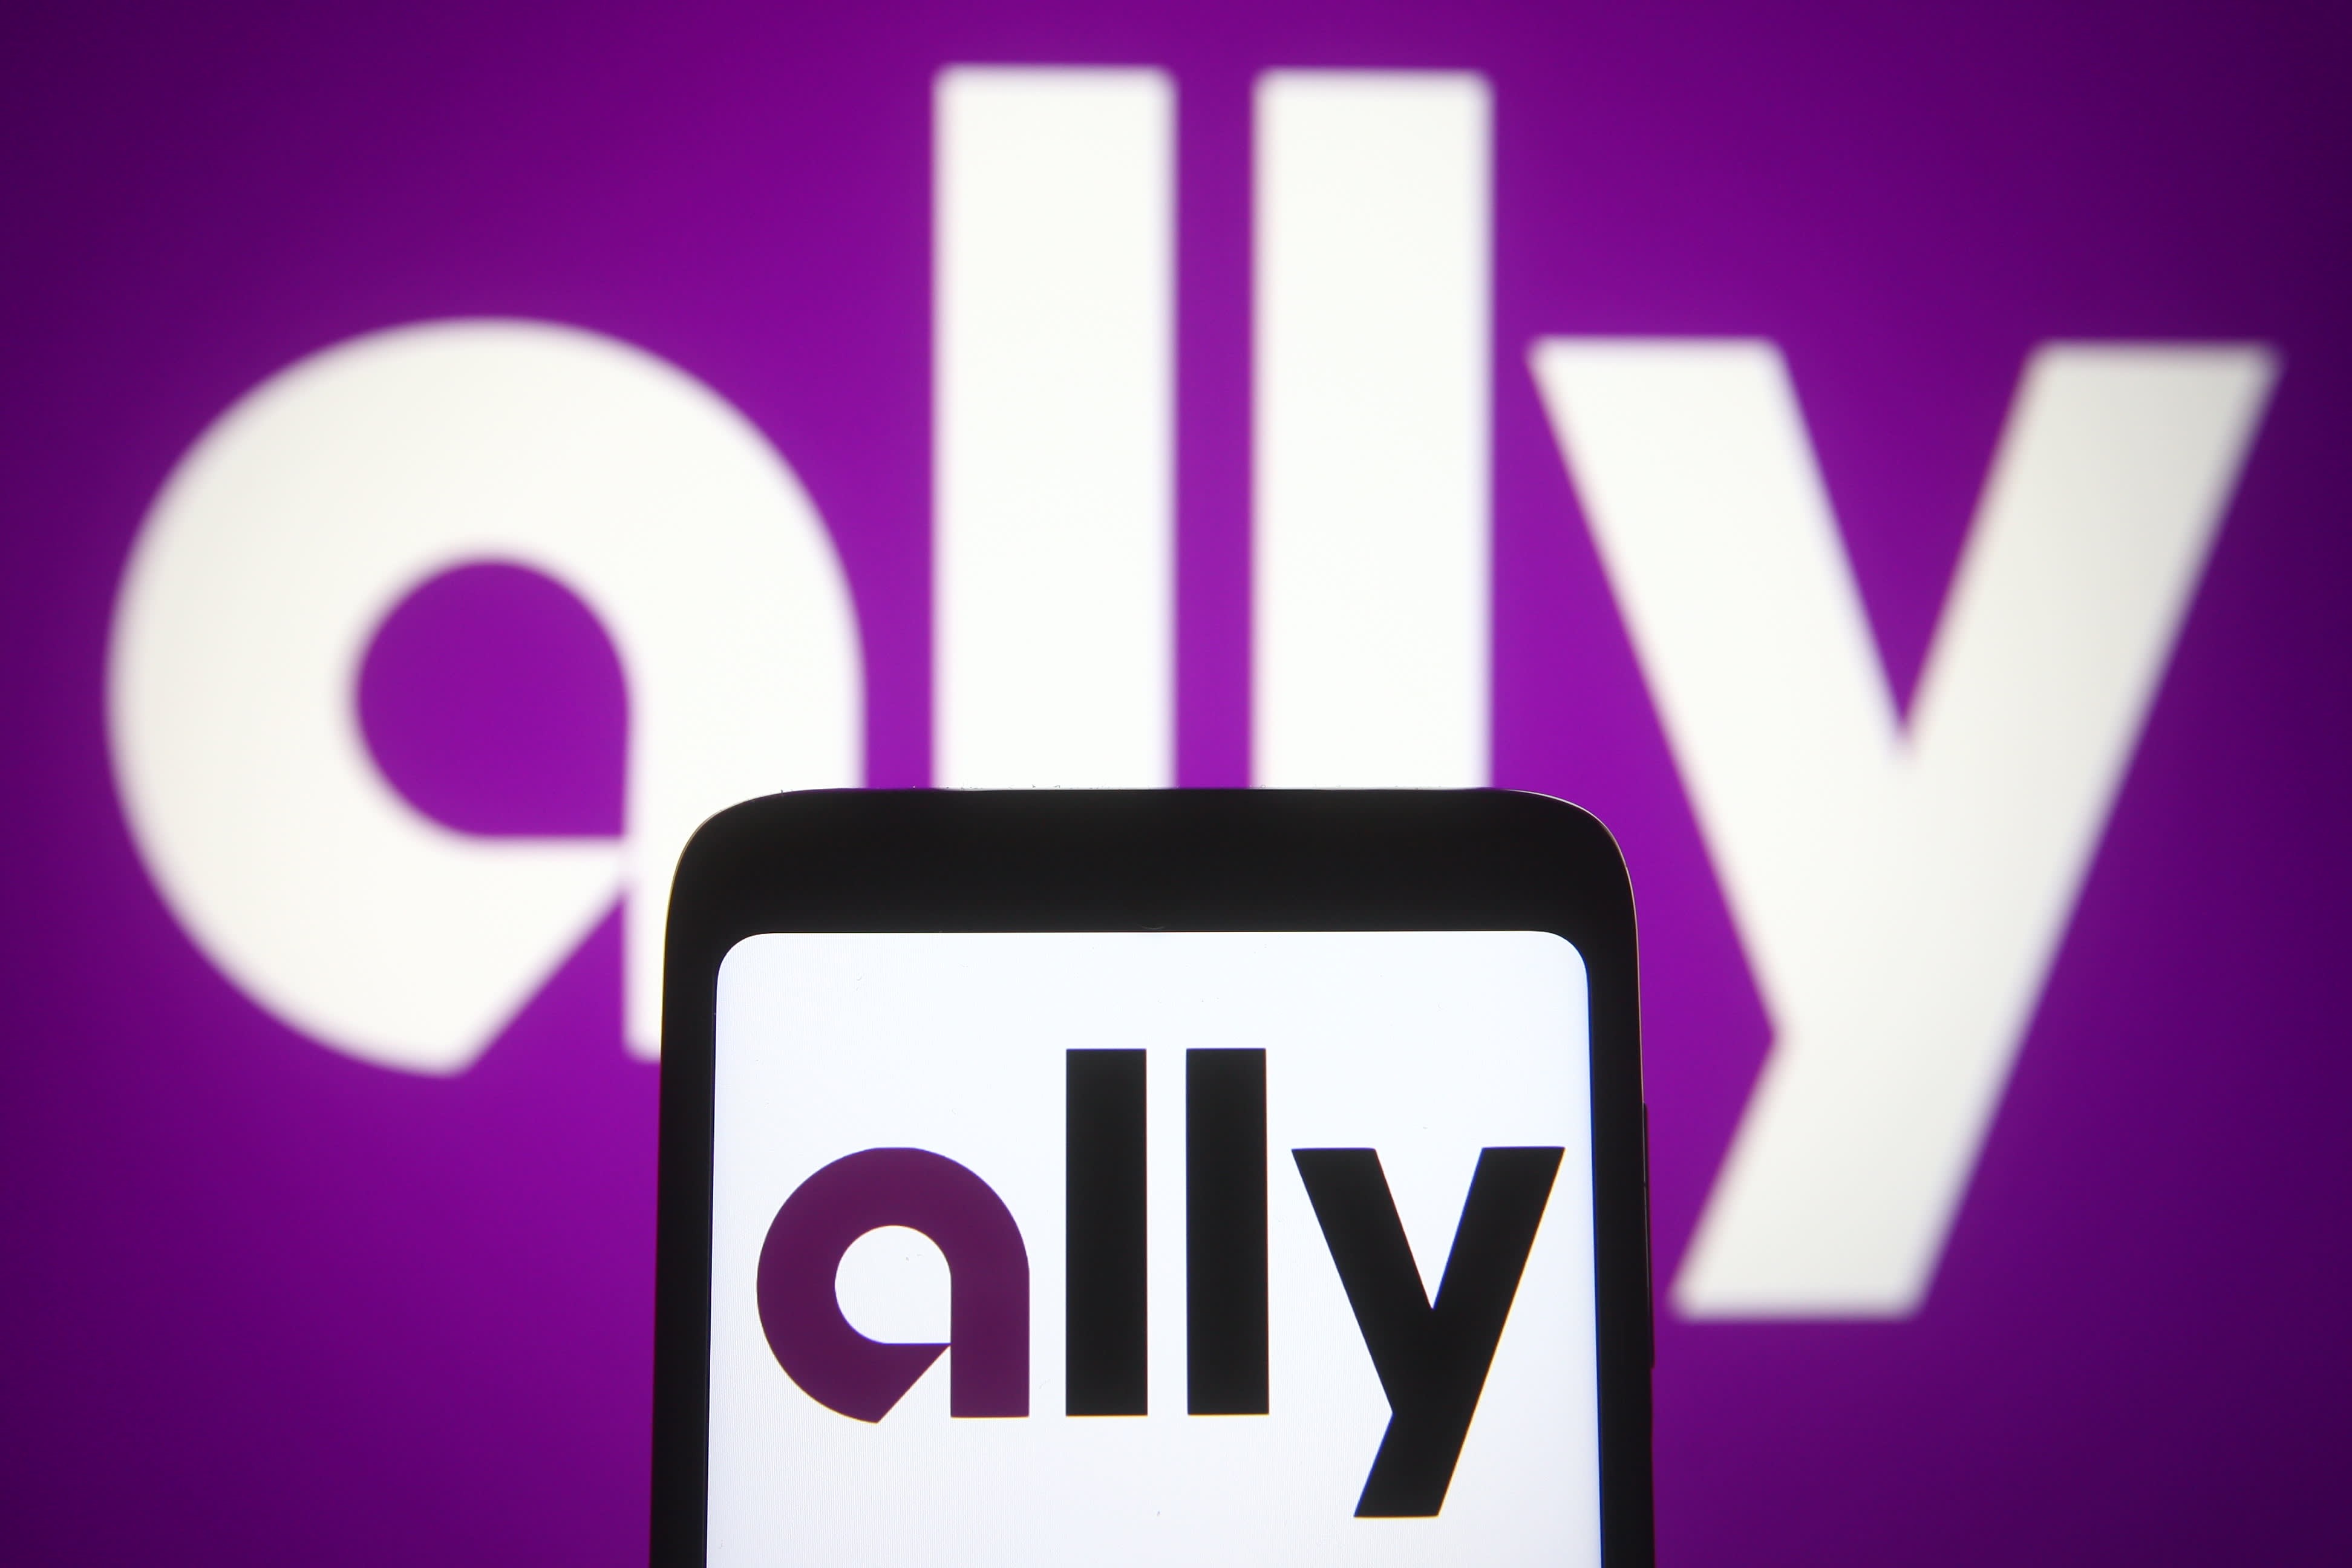 Morgan Stanley sells Ally Financial as ratings downgrade, stock could fall about 30% from here